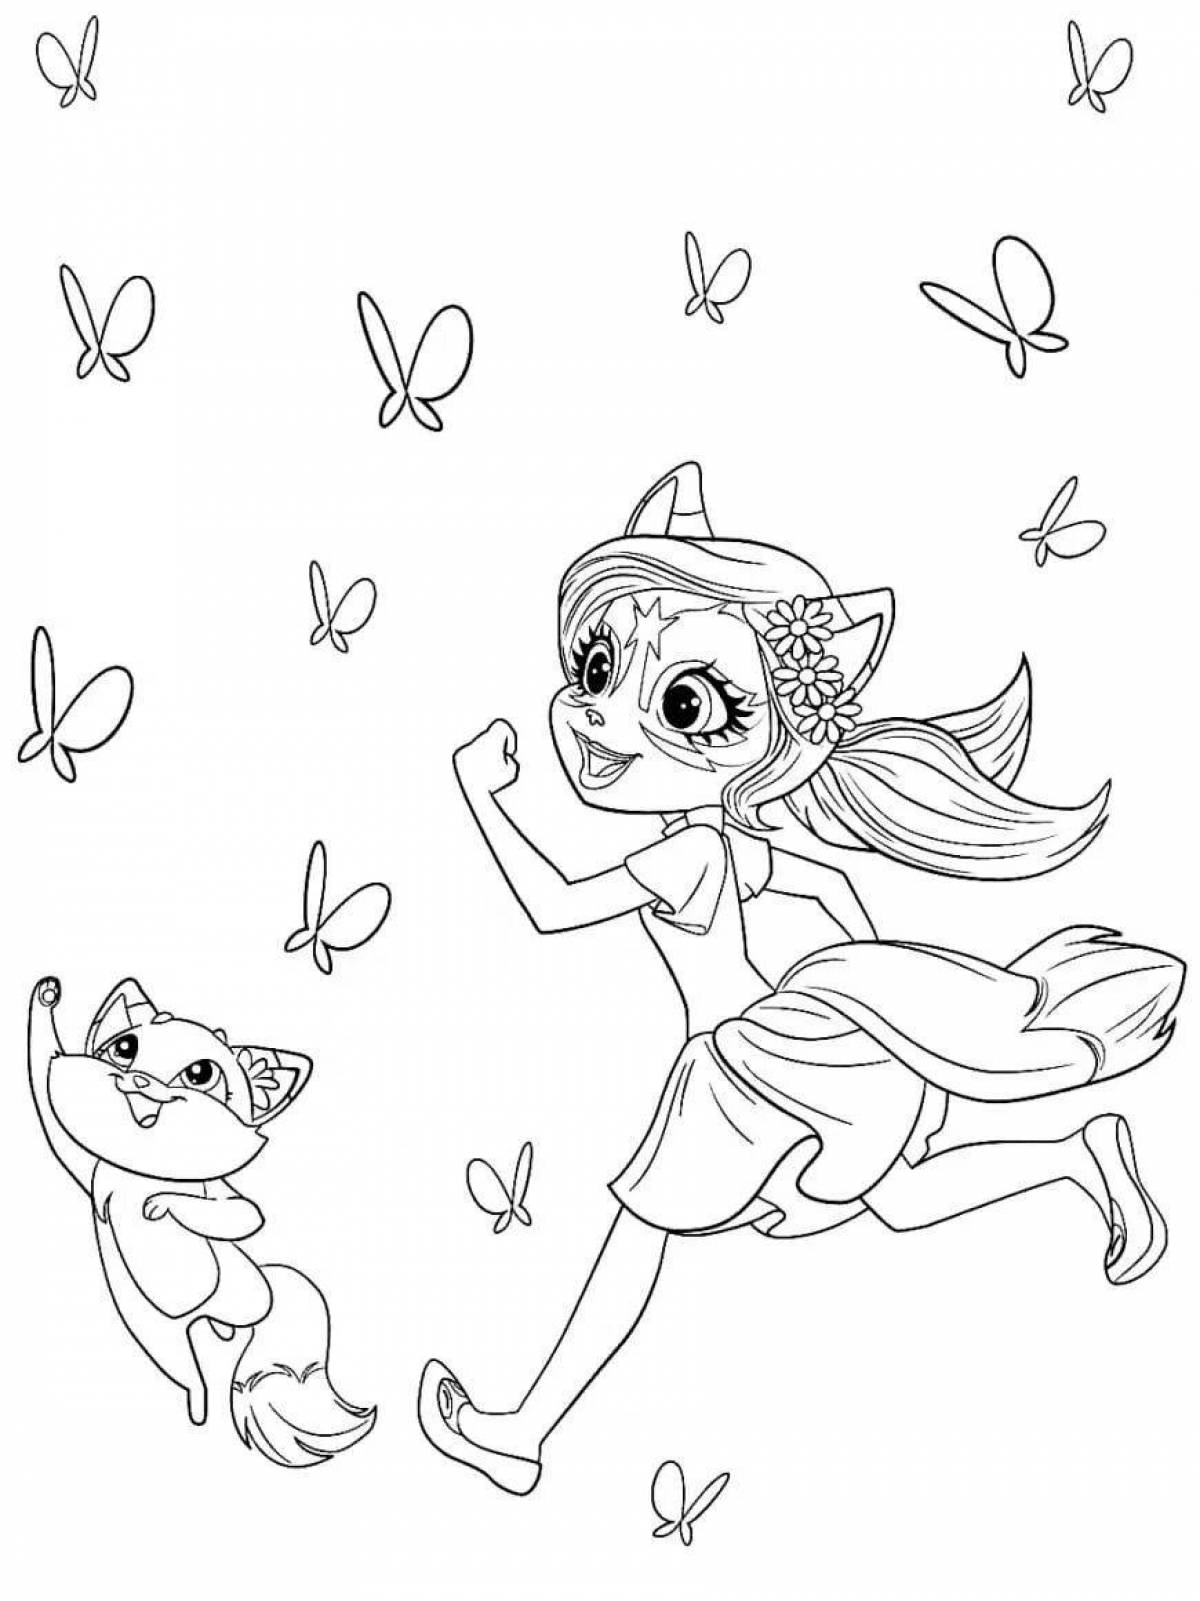 Cute felicity coloring page